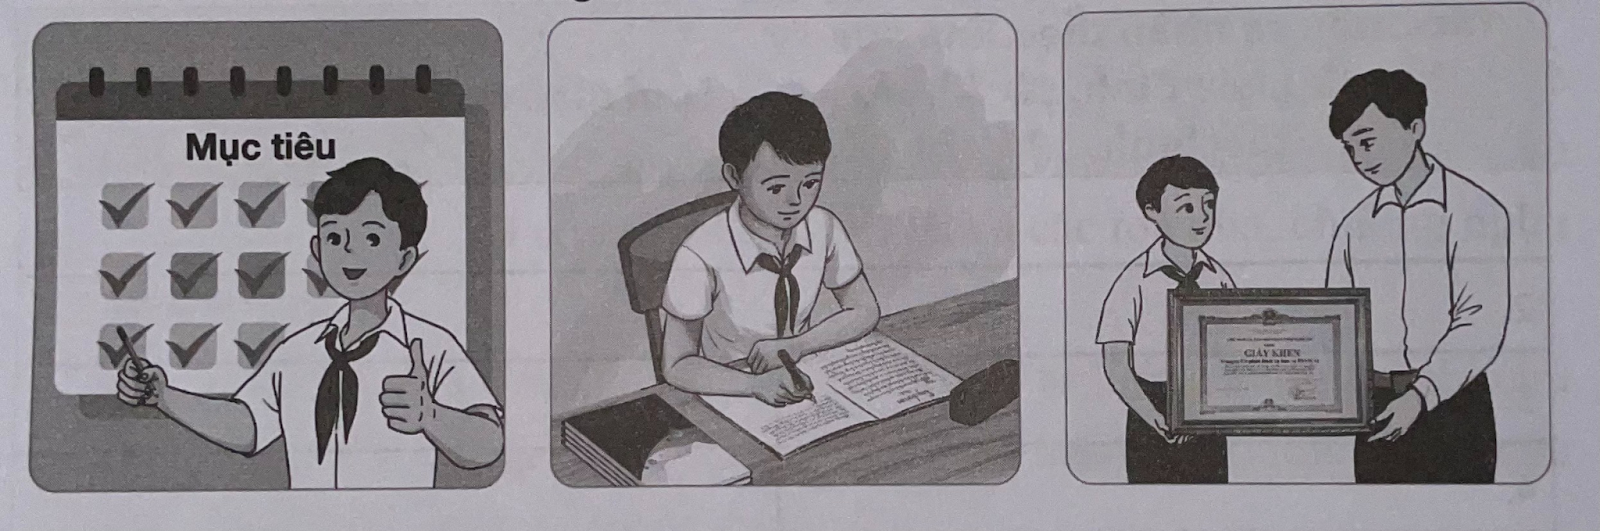 A child sitting at a desk writing on a book

Description automatically generated